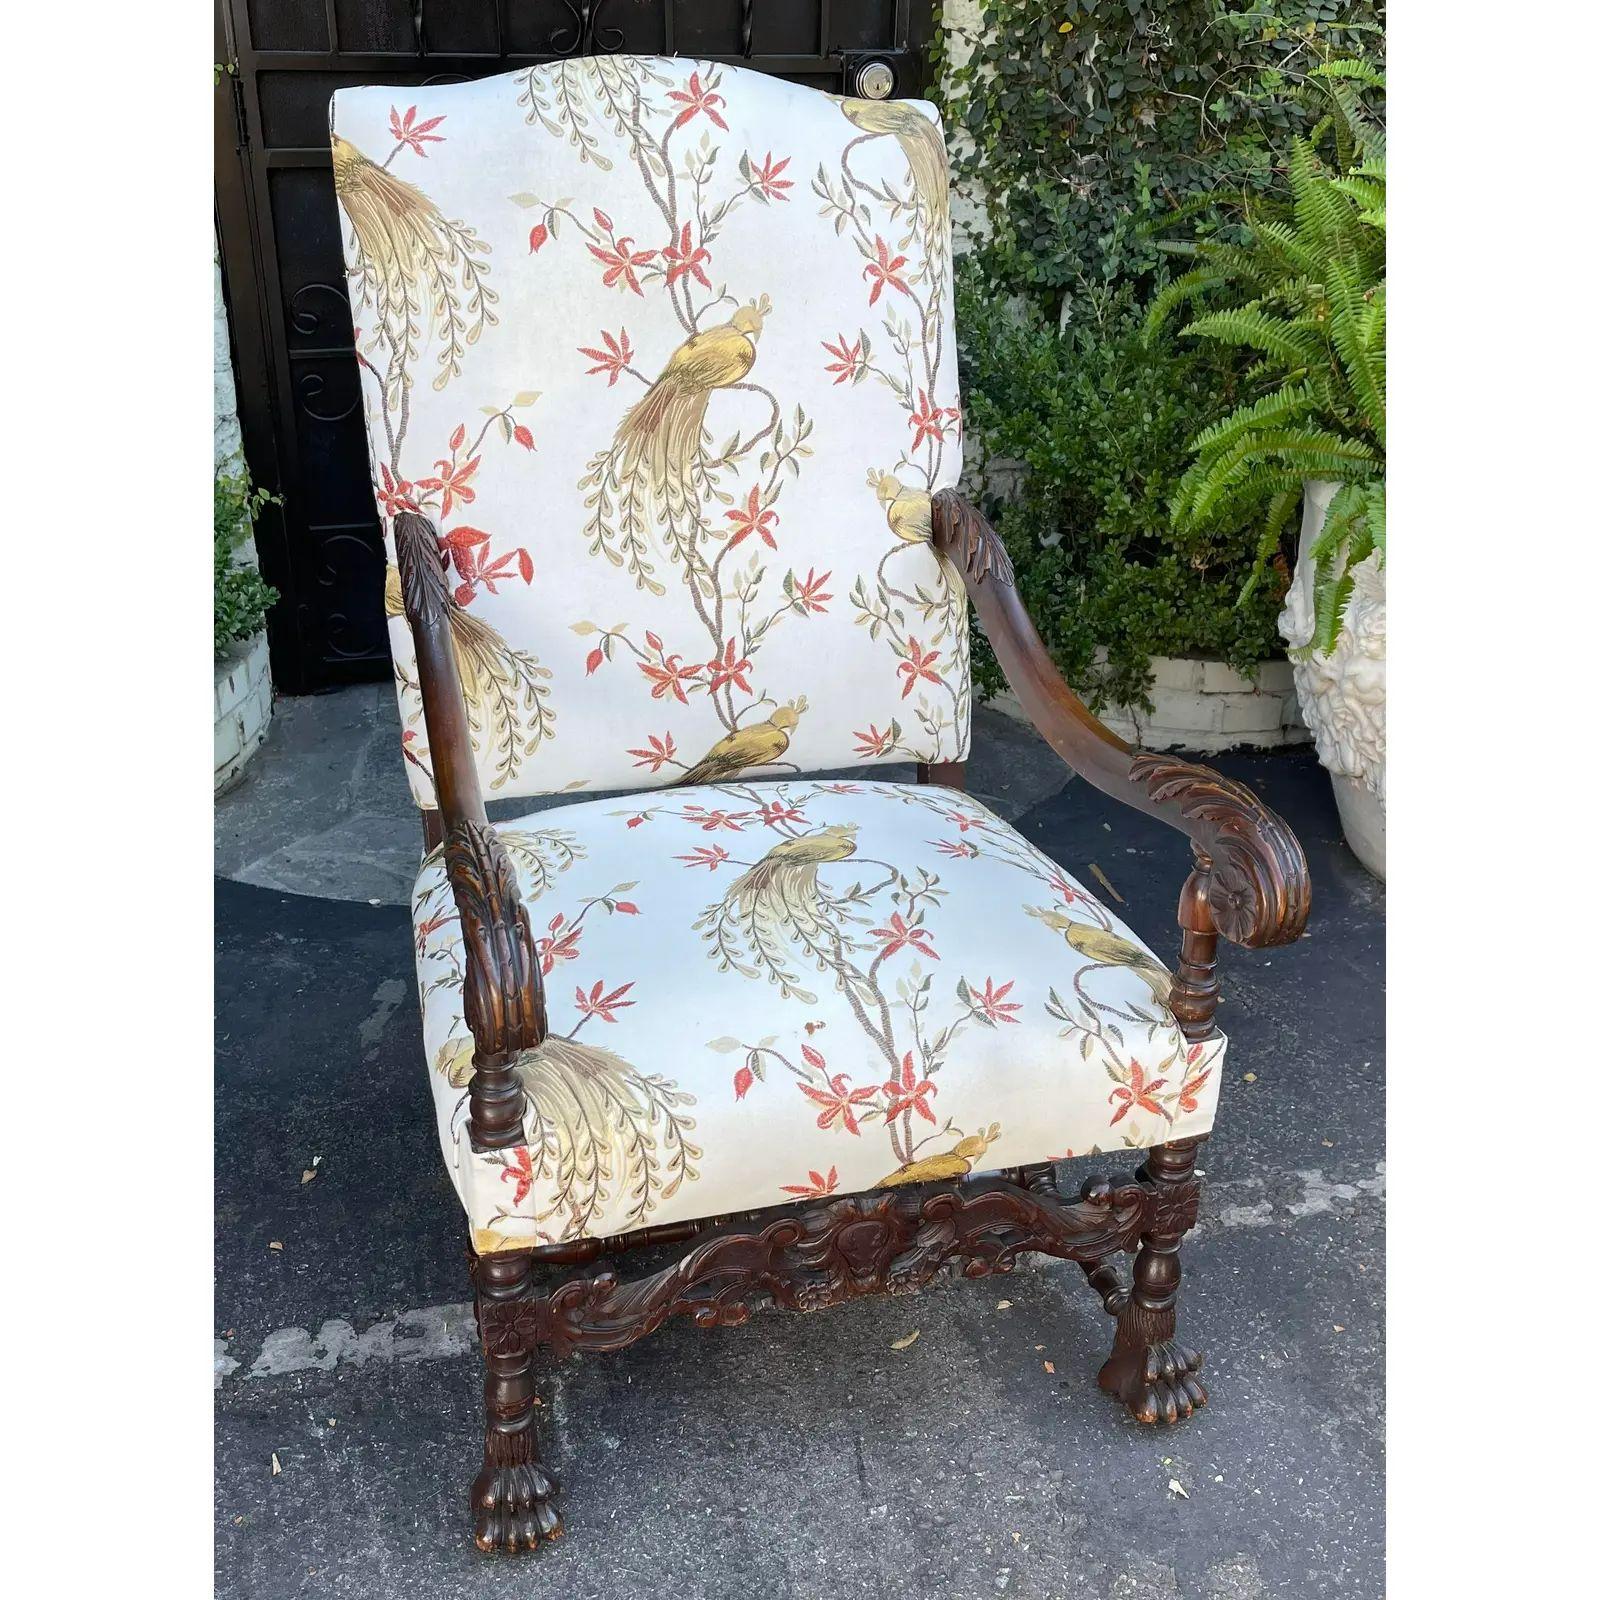 Antique carved walnut throne chair with embroidered bird fabric. It features finely carved details and high quality fabric upholstery.

Additional information: 
Materials: fabric, walnut
Color: White
Period: 19th century
Styles: Italian,